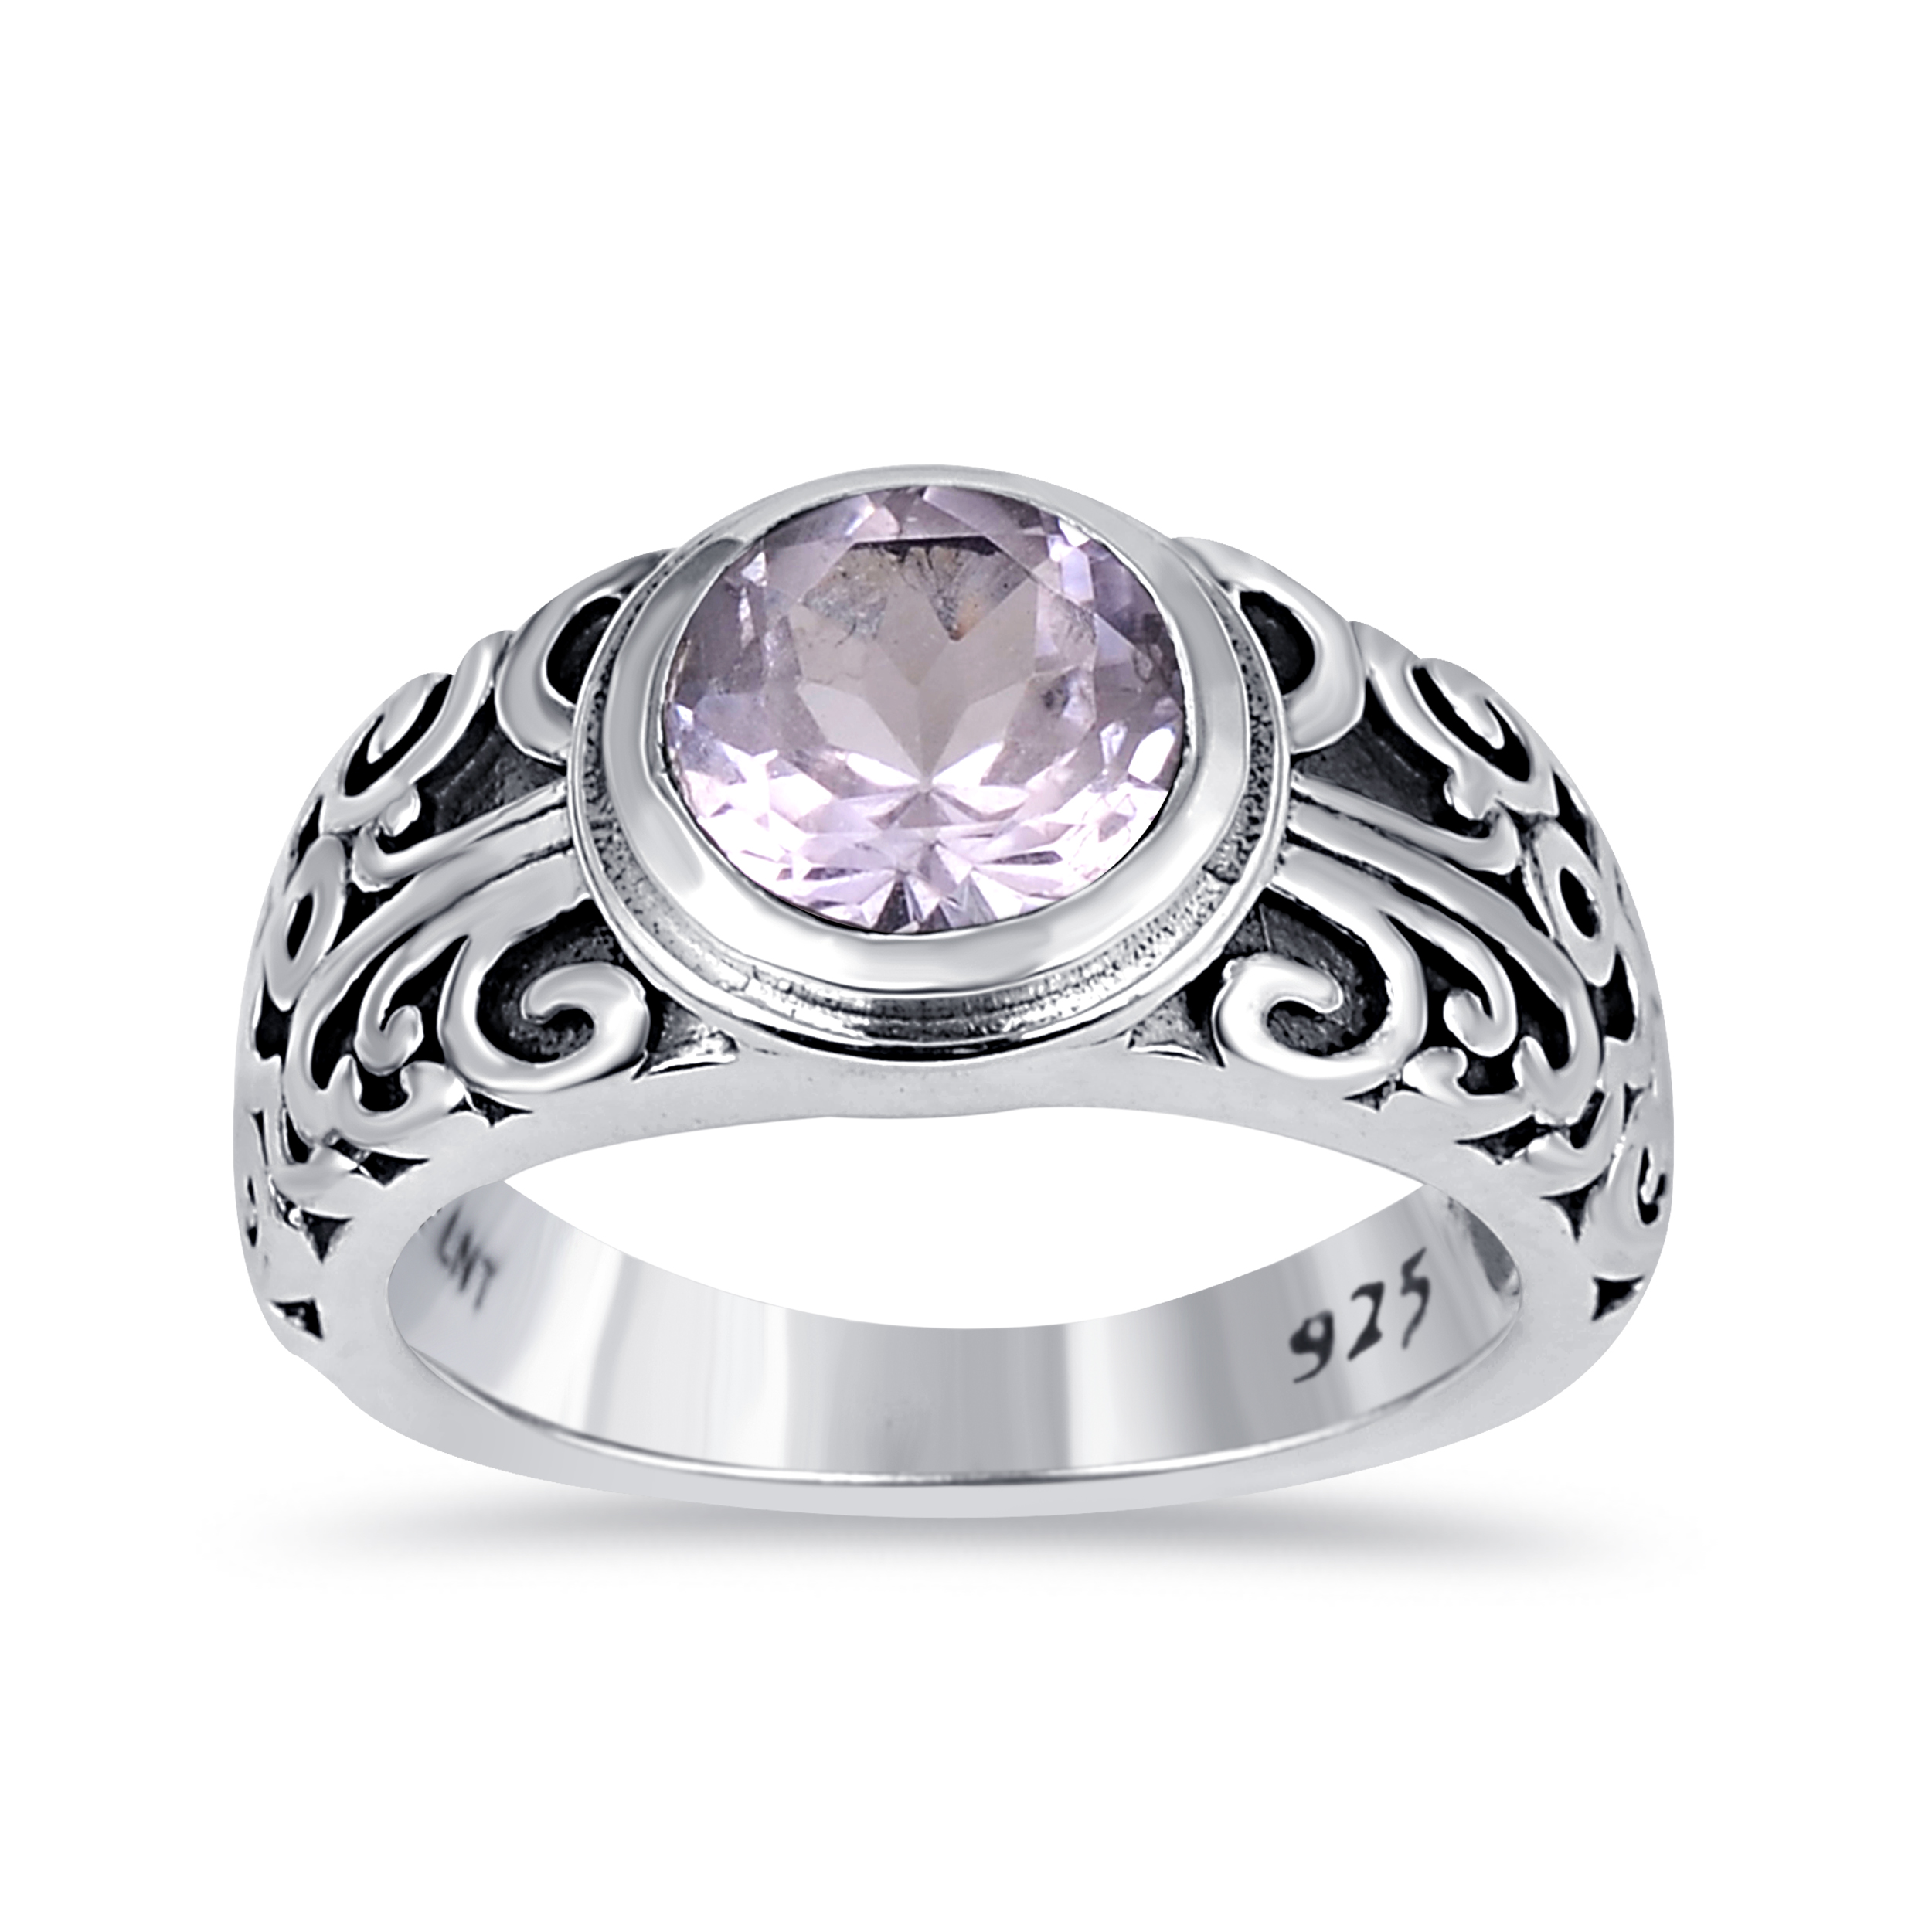 Gorgeous Filigree Vintage 1.78 Ctw Round Pink Amethyst 925 Sterling Silver Classical Ring For Women By Orchid Jewelry - image 4 of 7